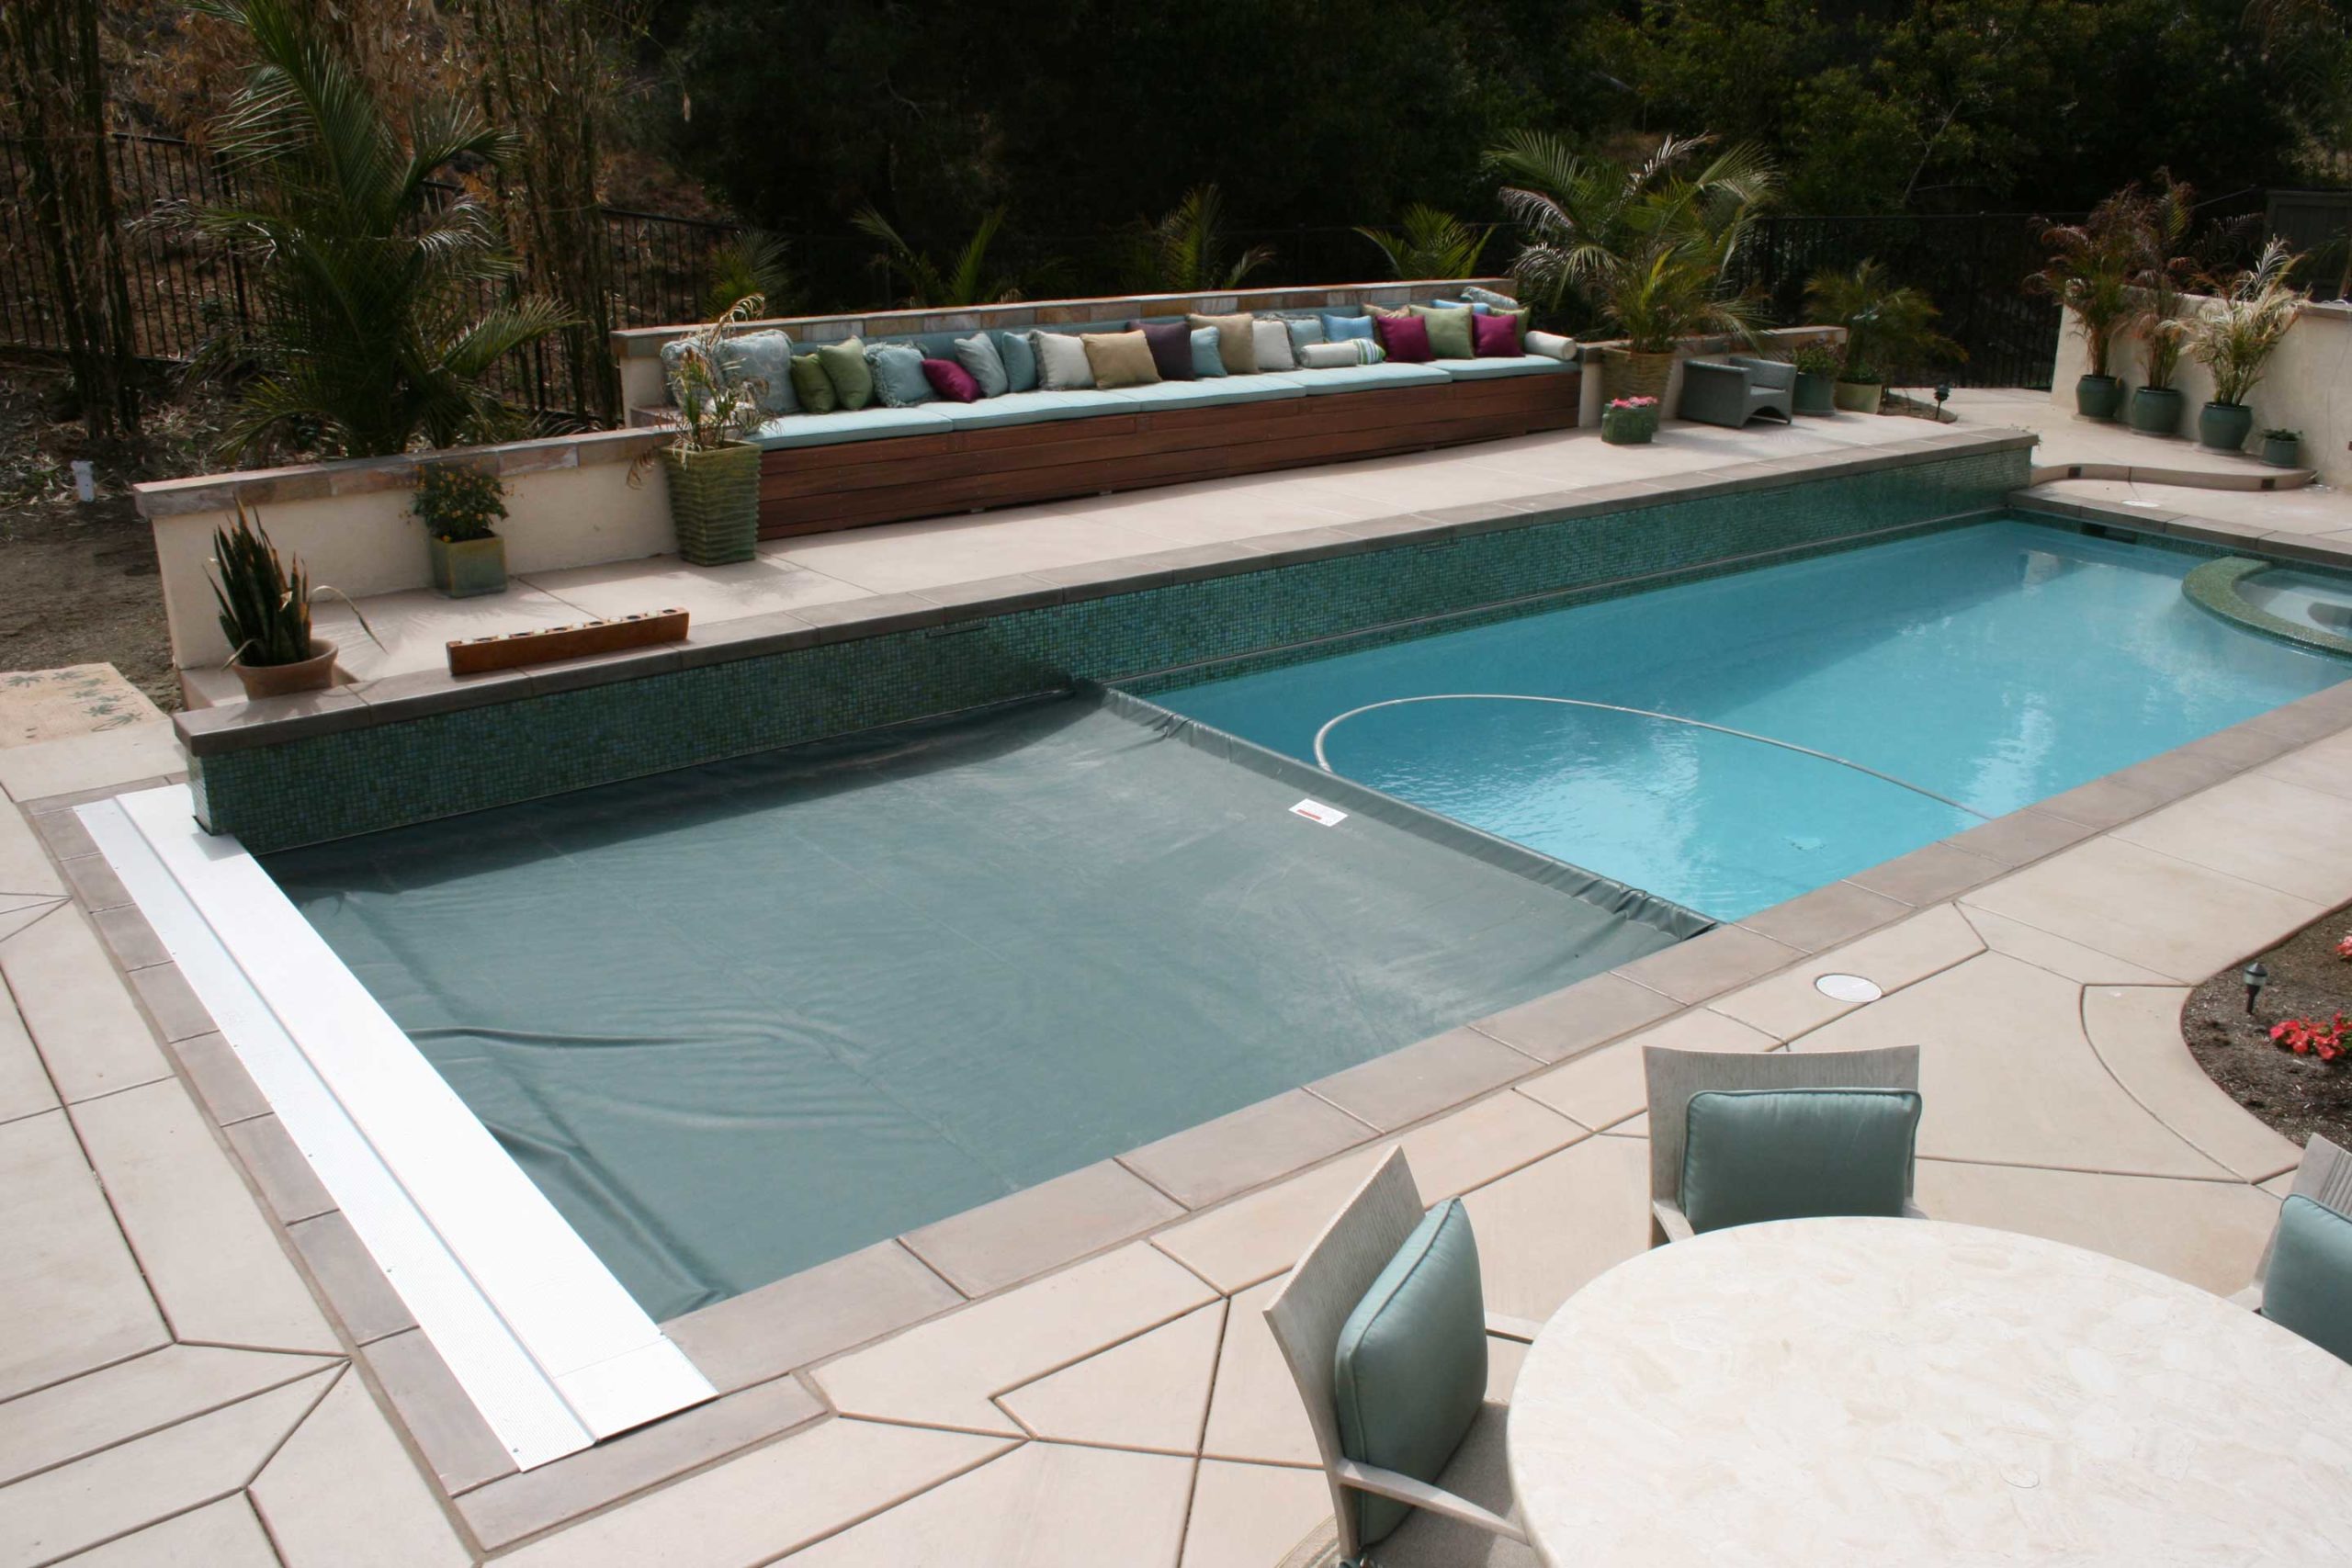 What is the Best Type of Swimming Pool for My Home? - Leisure